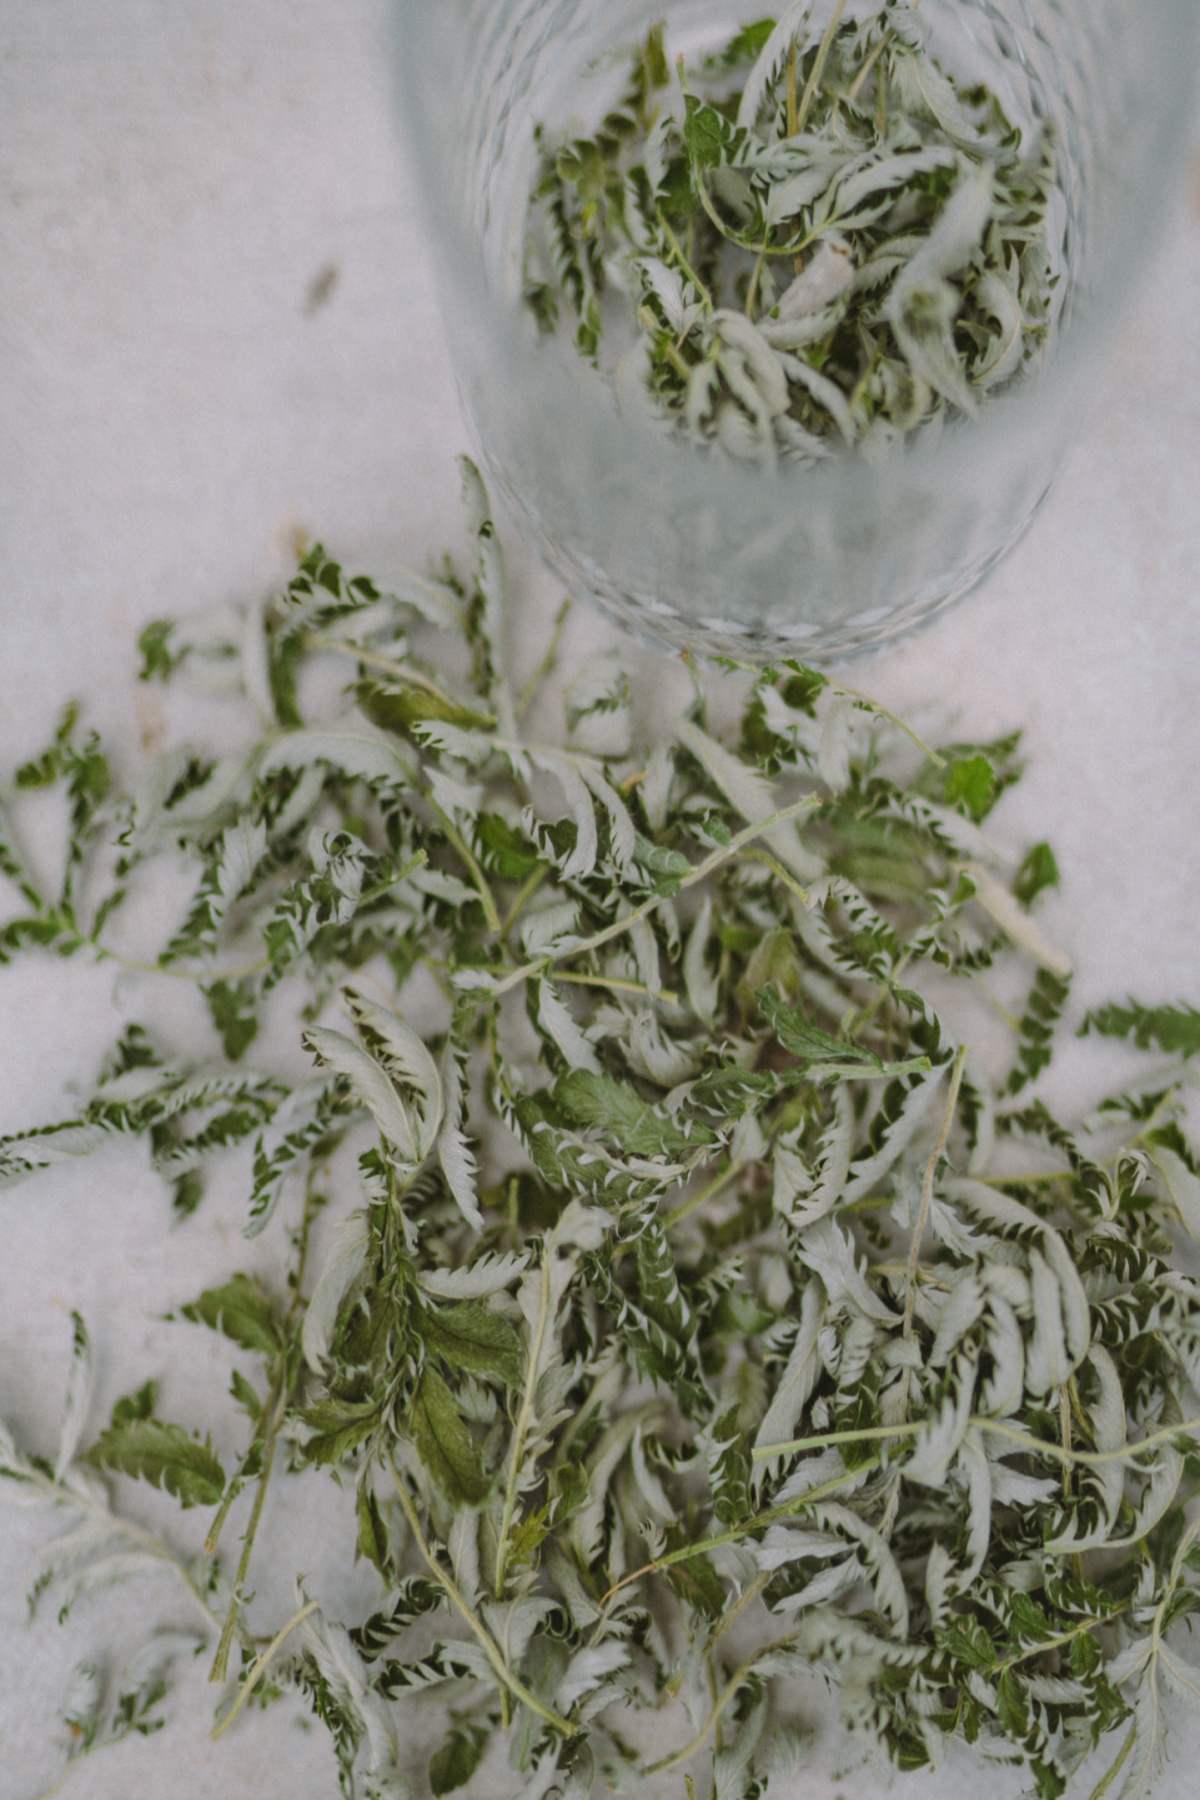 silverweed in a glass and spread on the table